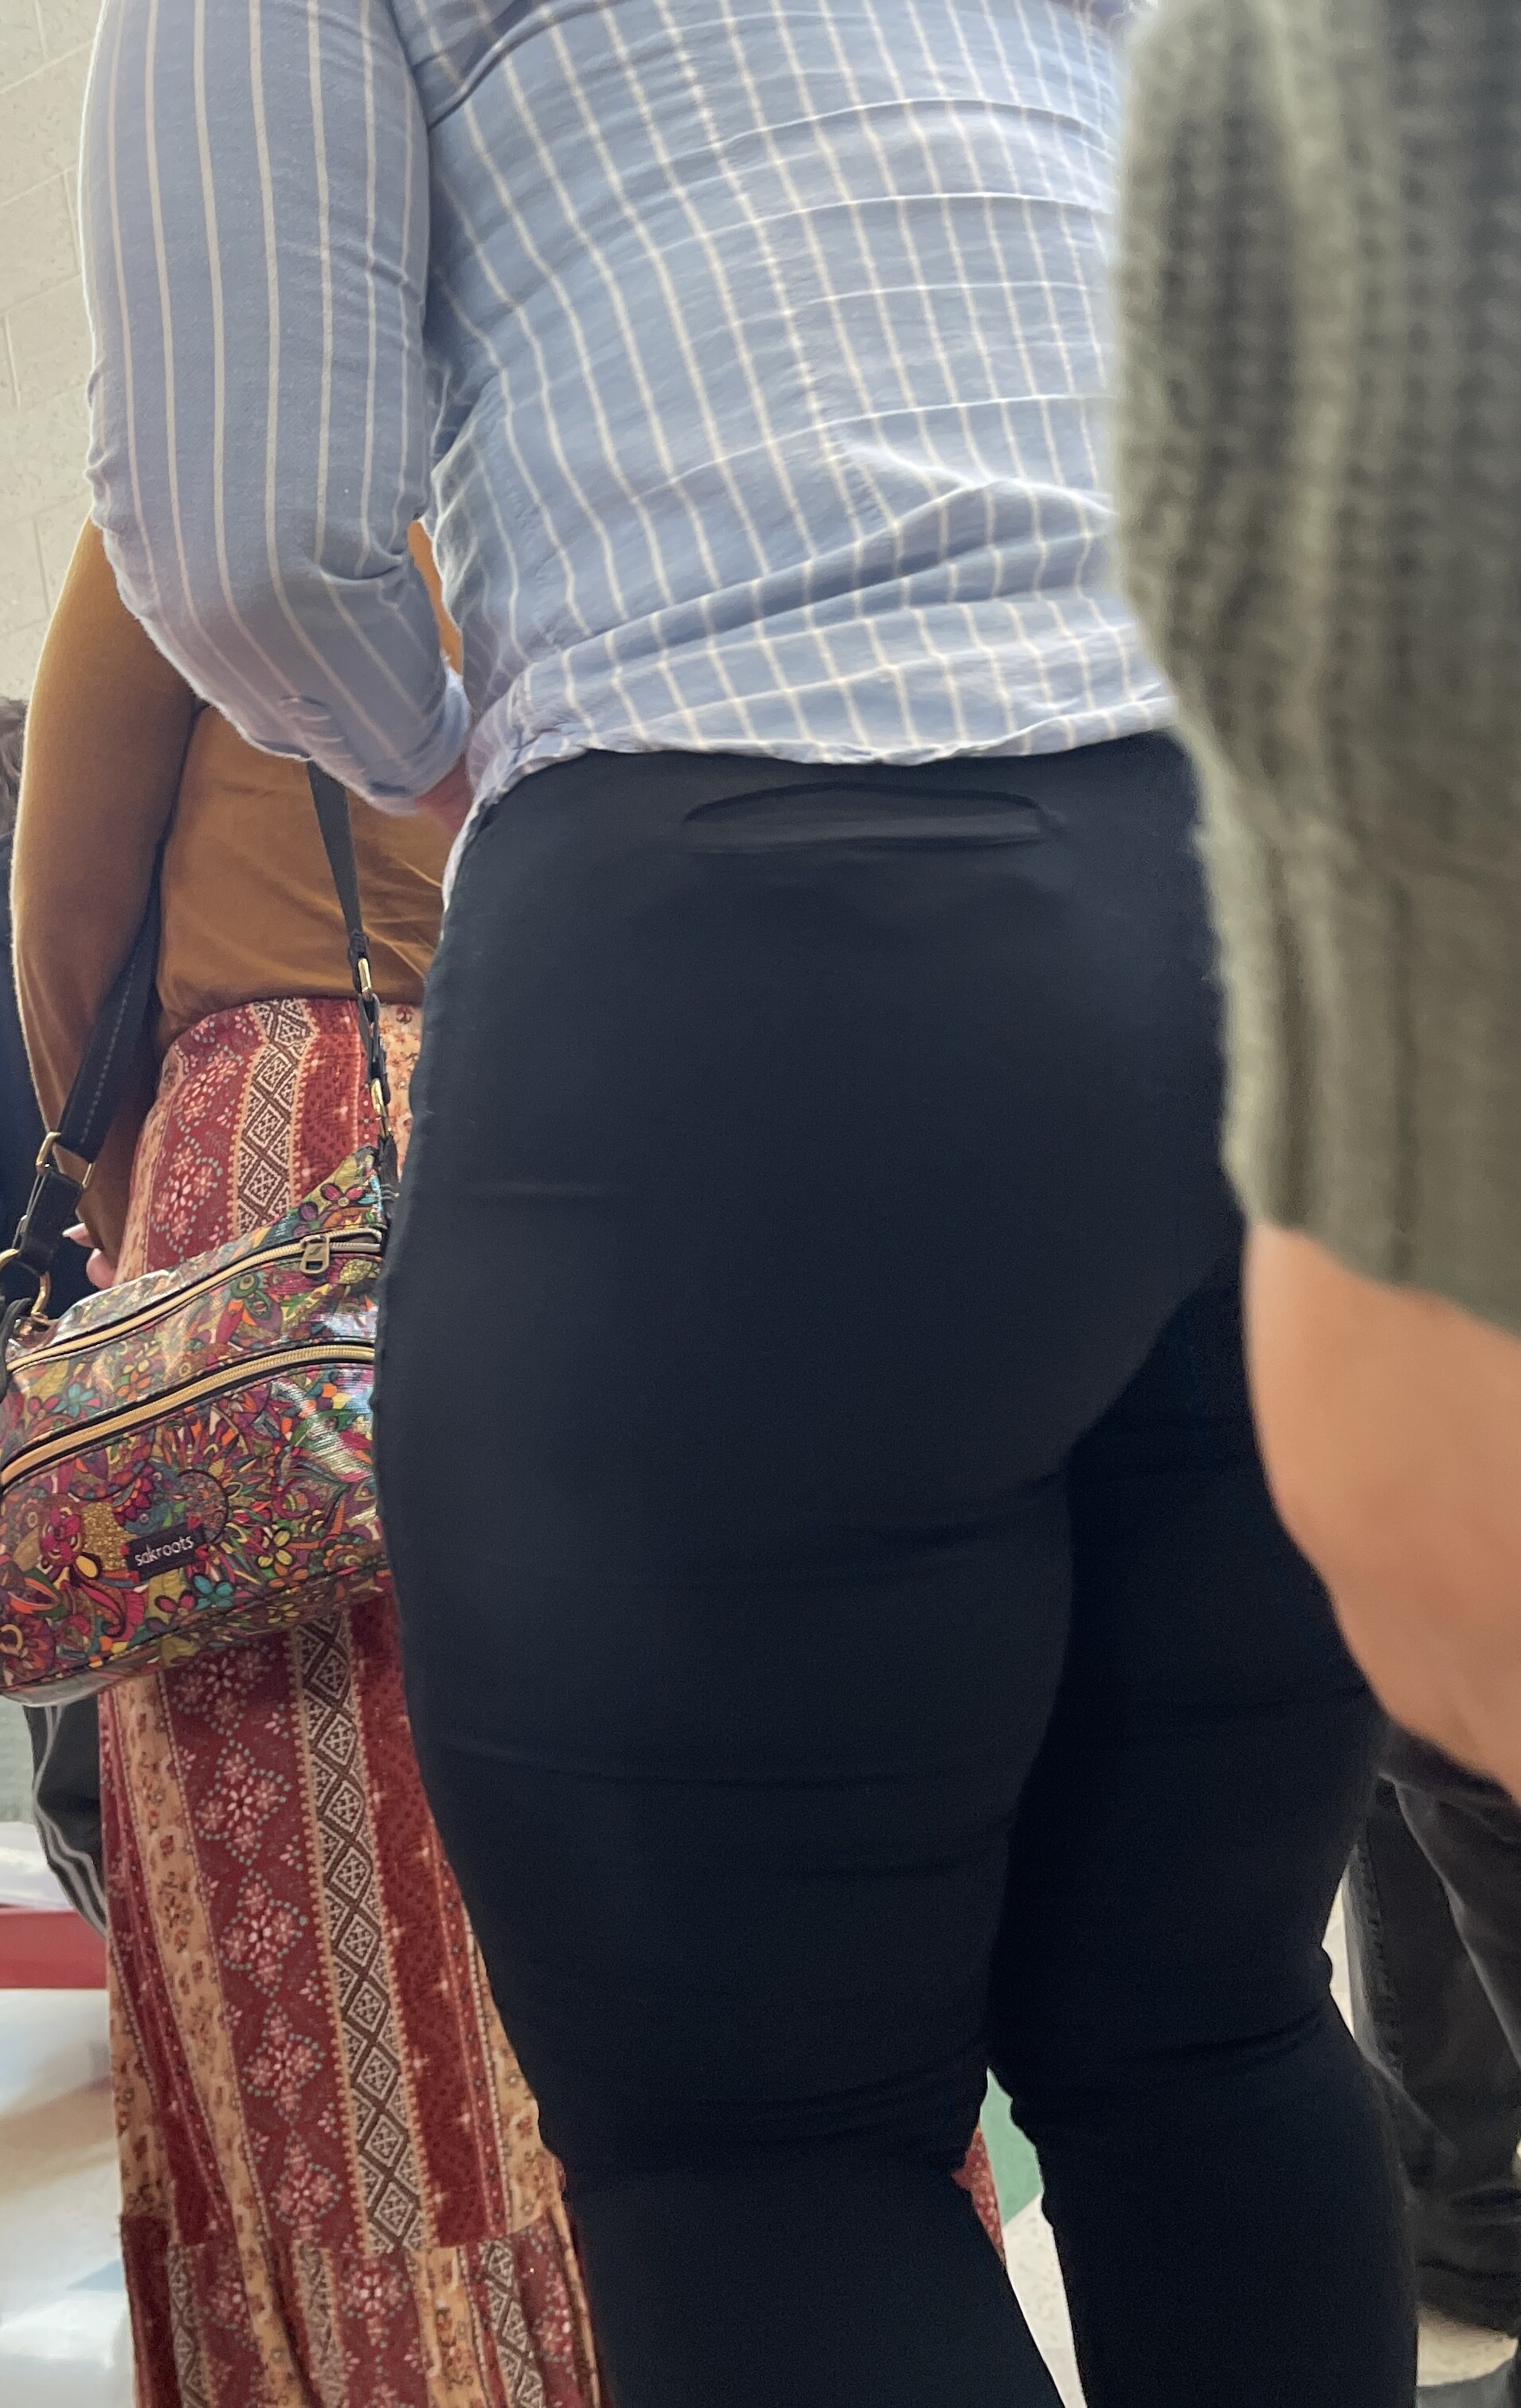 Monster Booty On a Beauty! - Tight Jeans - Forum